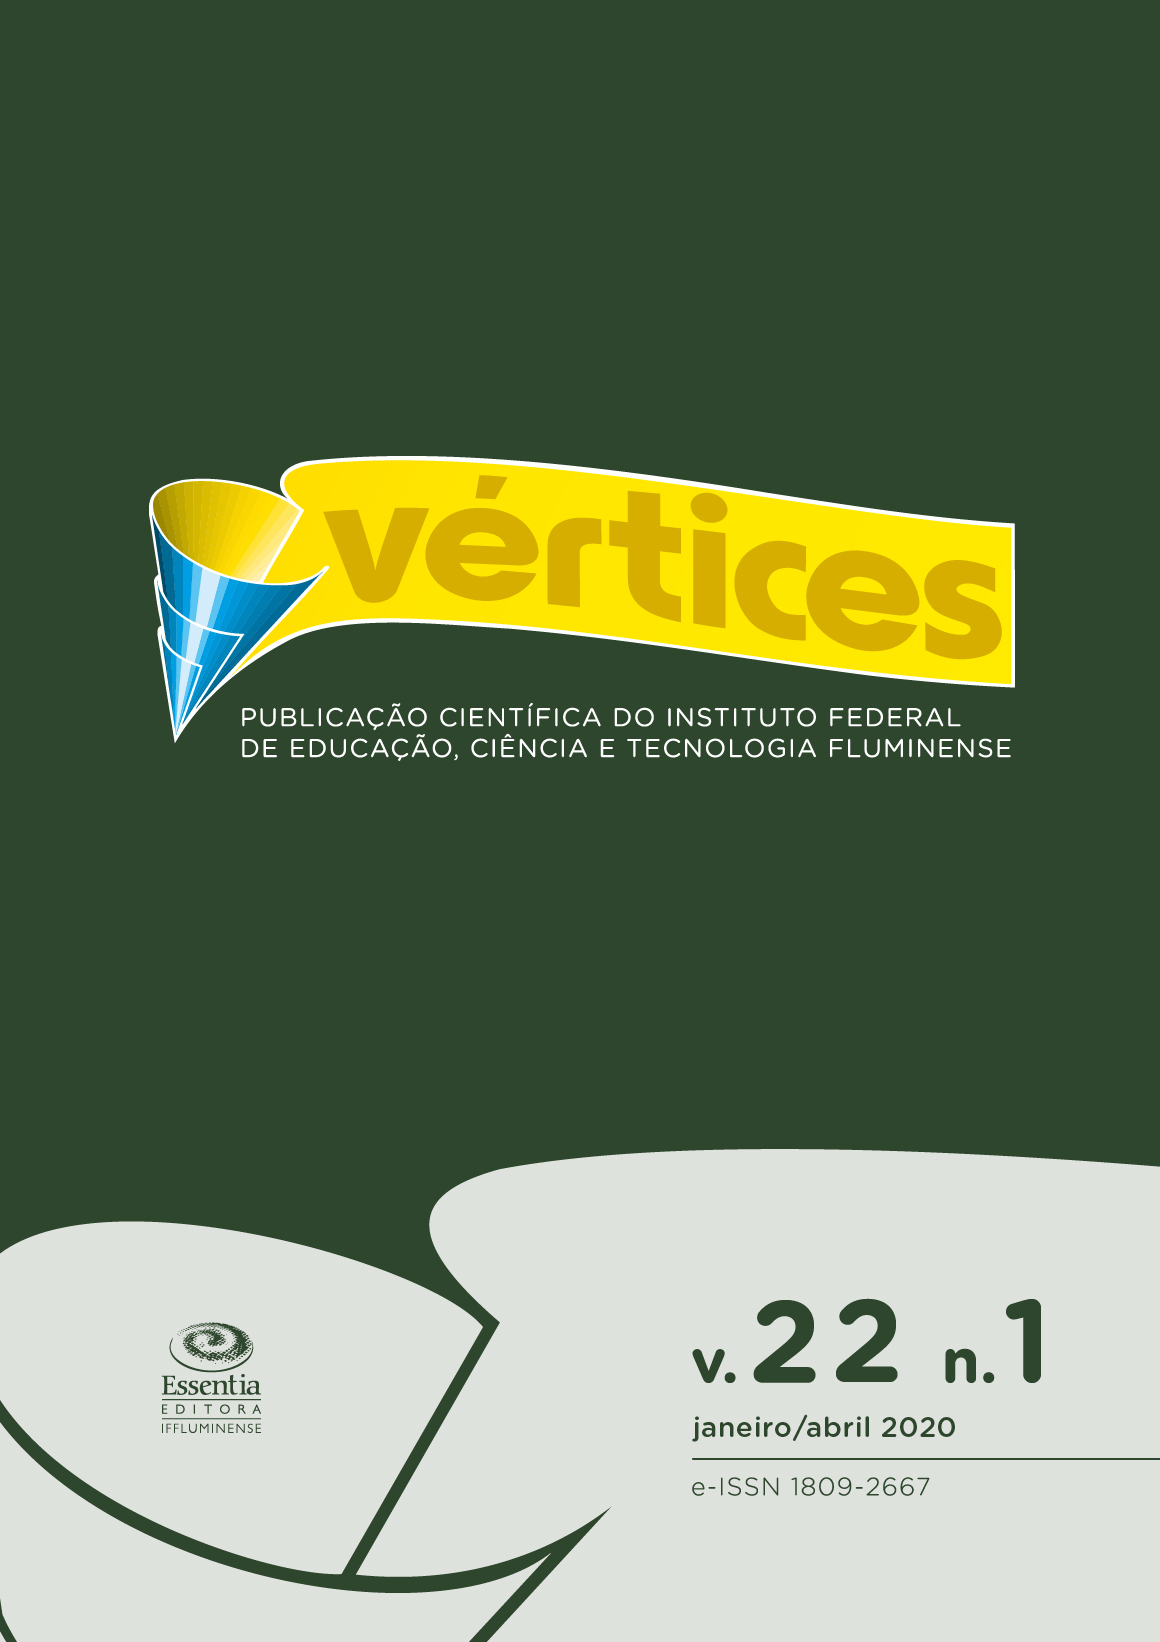 Vértices volume 22 issue 1 january/april 2020 e-issn 1809-2667